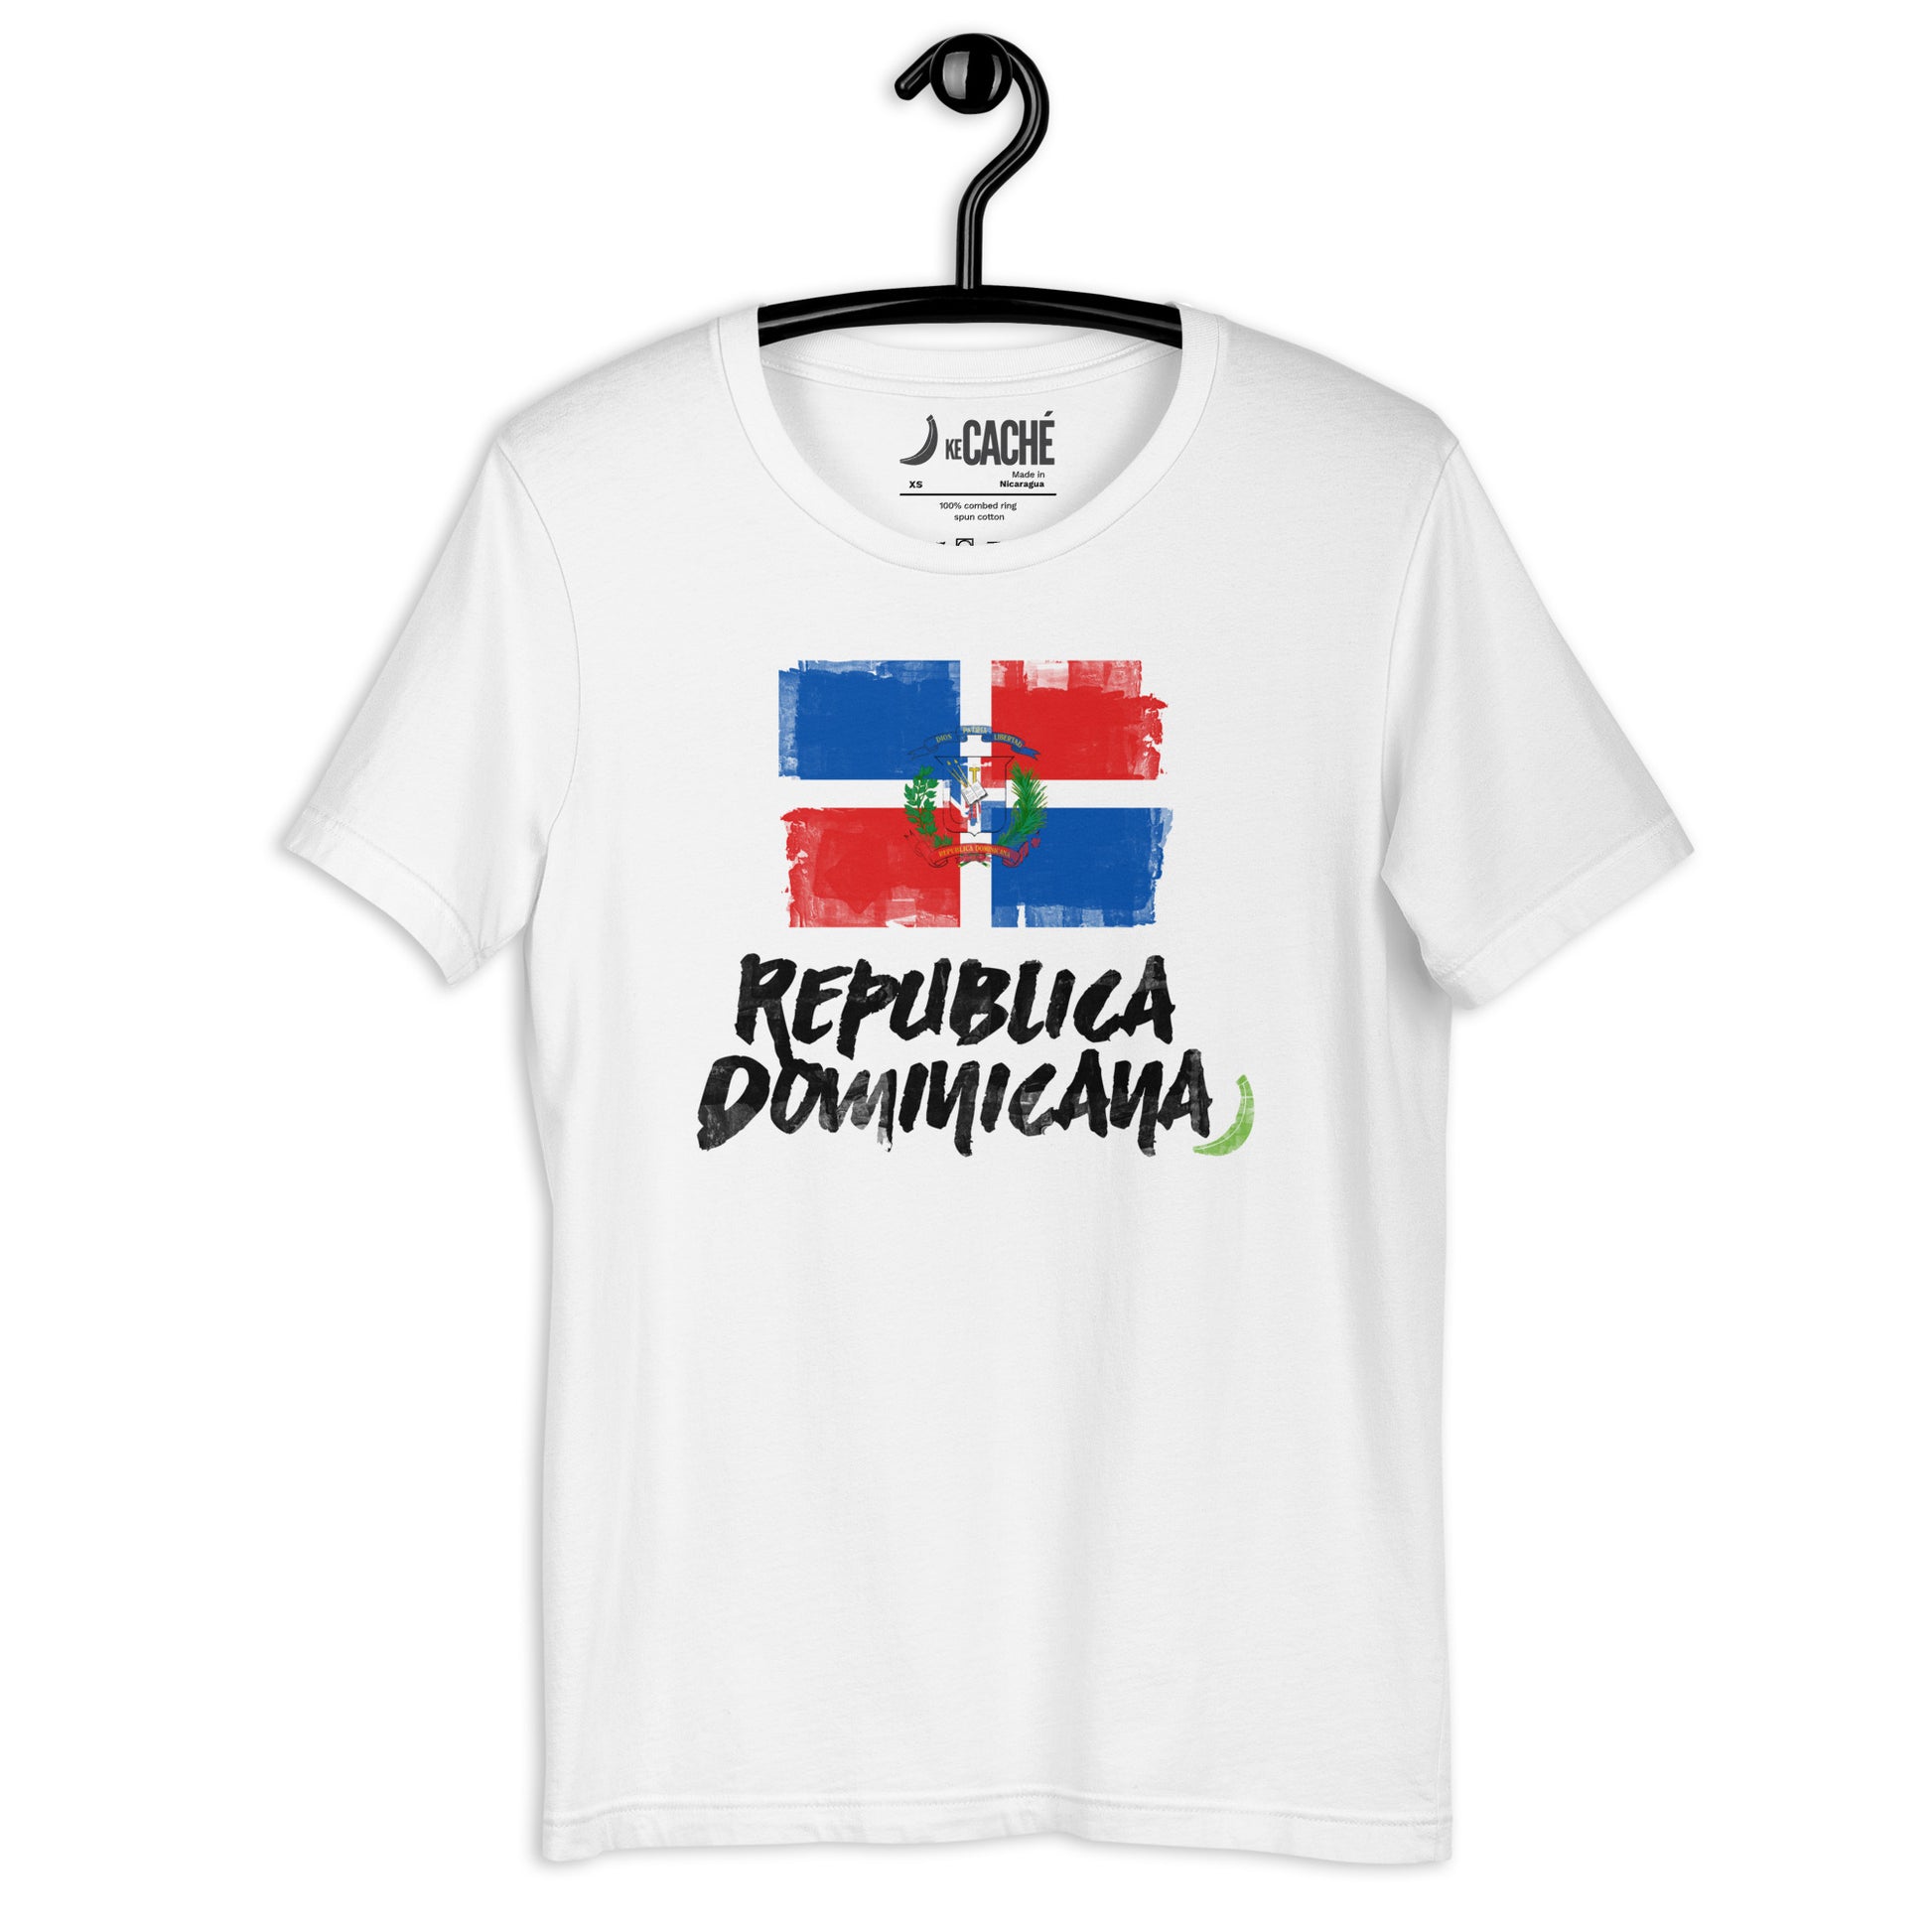 KeCaché T-shirt with sponged brushed texture design featuring the Dominican flag and the words 'Republica Dominicana'.